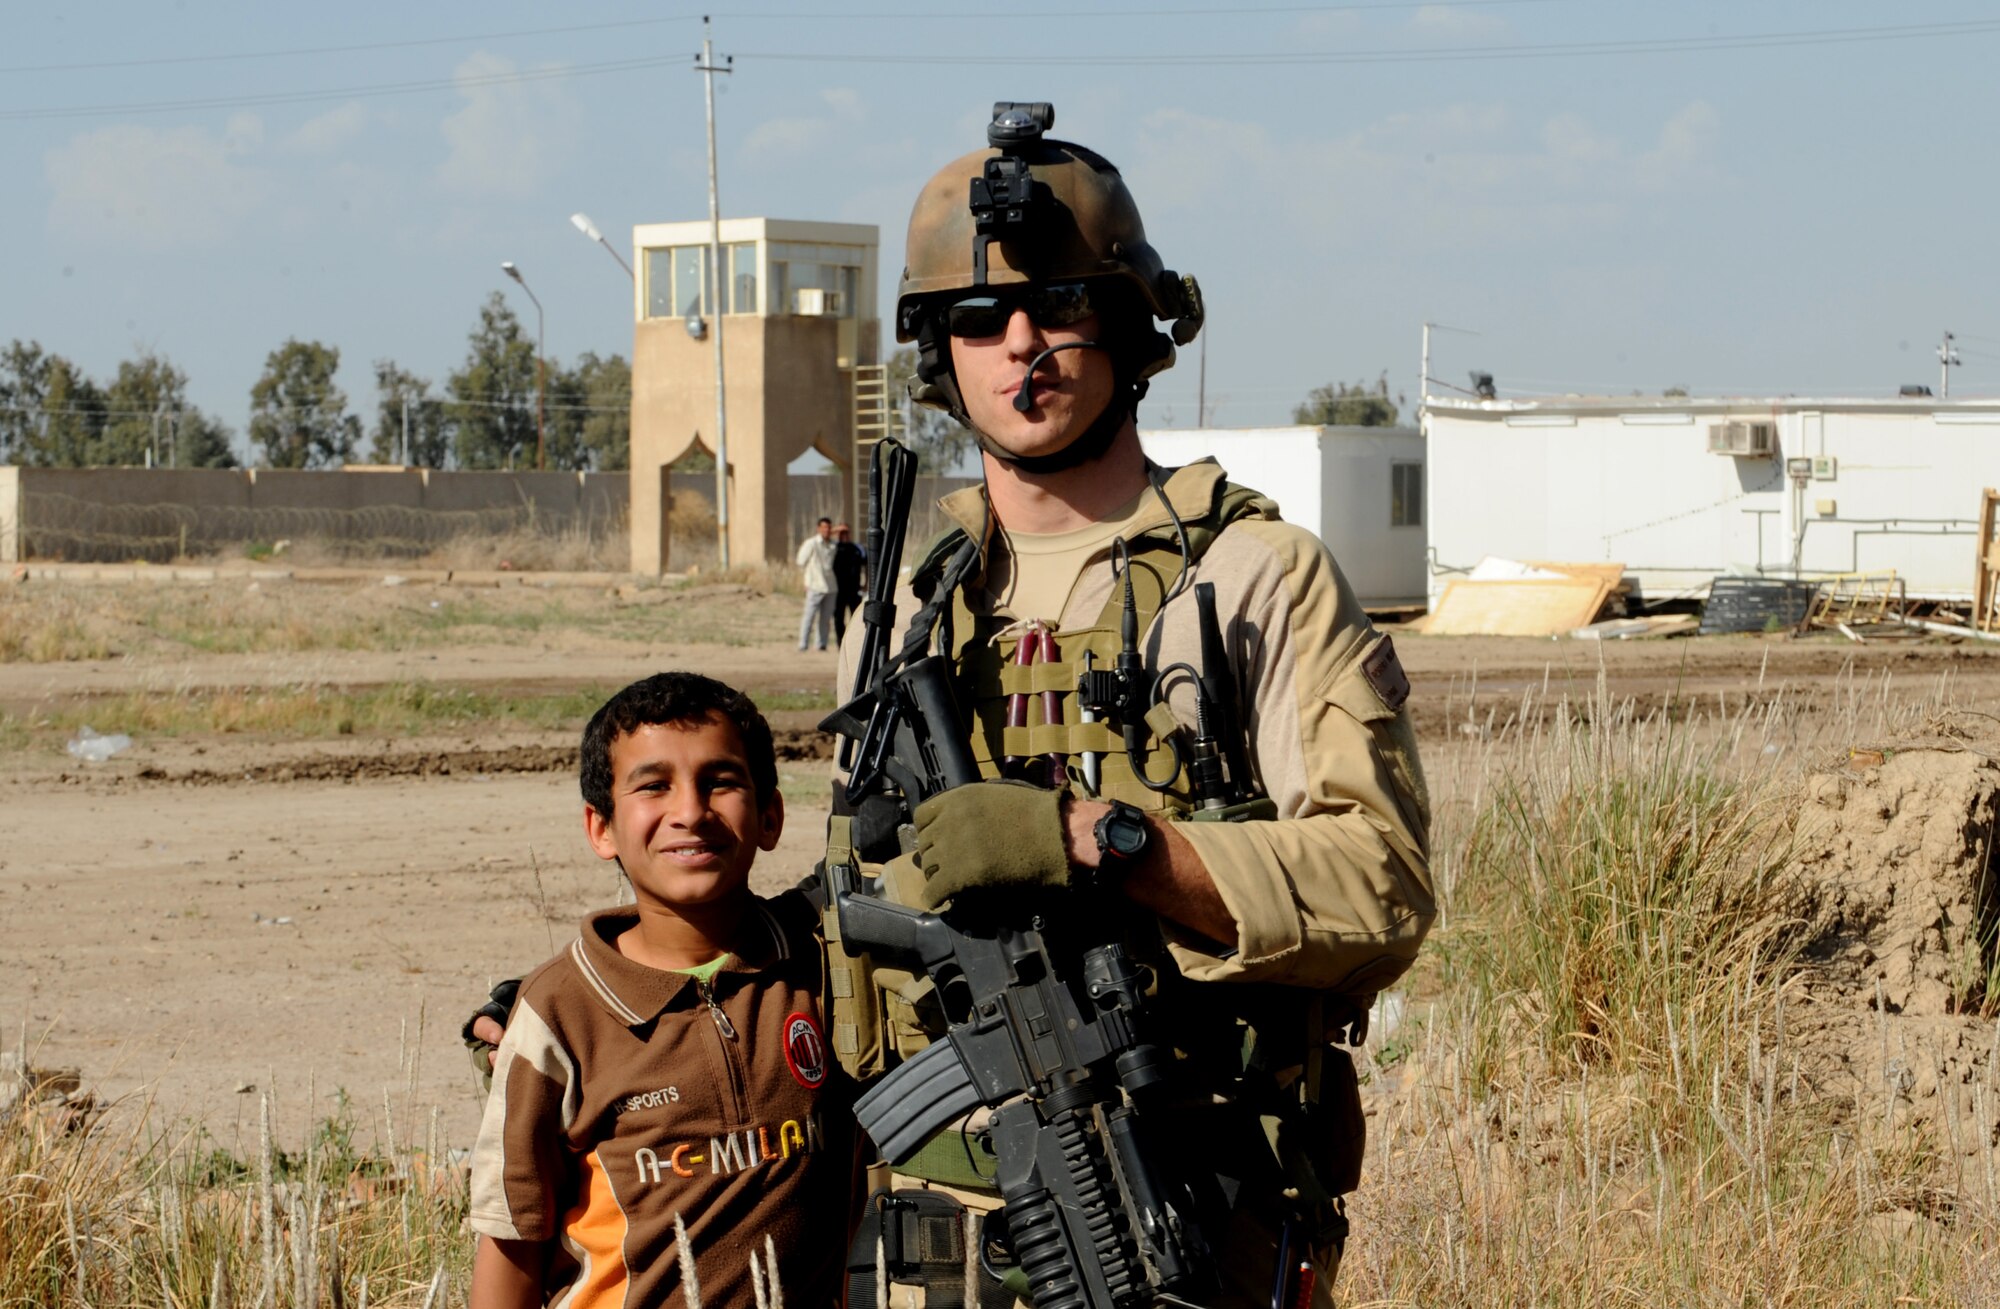 U.S. Air Force Combat Rescue Officer Capt. Robert Wilson, 64th Expeditionary Rescue Squadron, Joint Base Balad, Iraq, takes time for a photograph with an Iraqi boy April 10, 2009, in support of Operation Iraqi Freedom.  (U.S. Air Force photo by Staff Sgt. James L. Harper Jr.)Released